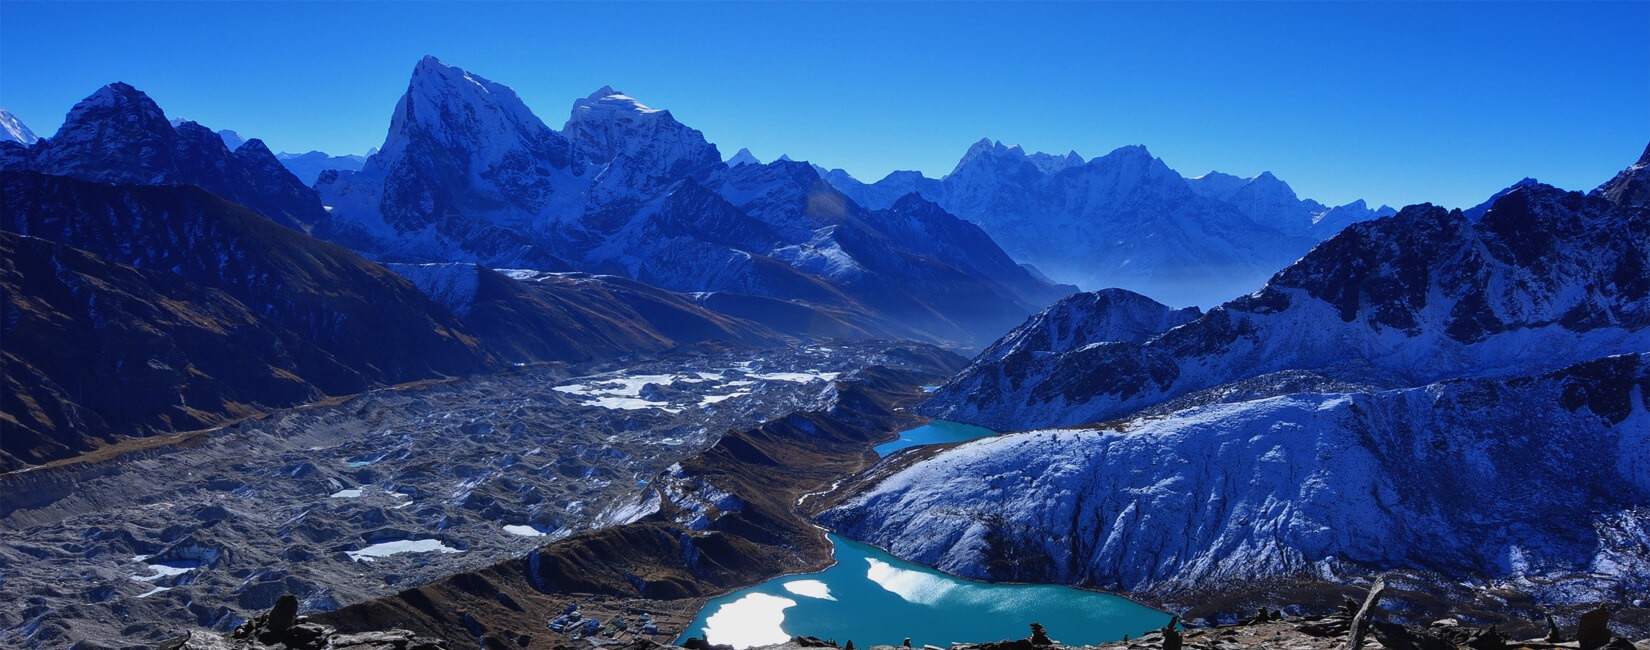 Nepal's Spring Delight: An Easy Guide to Exciting Adventures by Ascent Trails